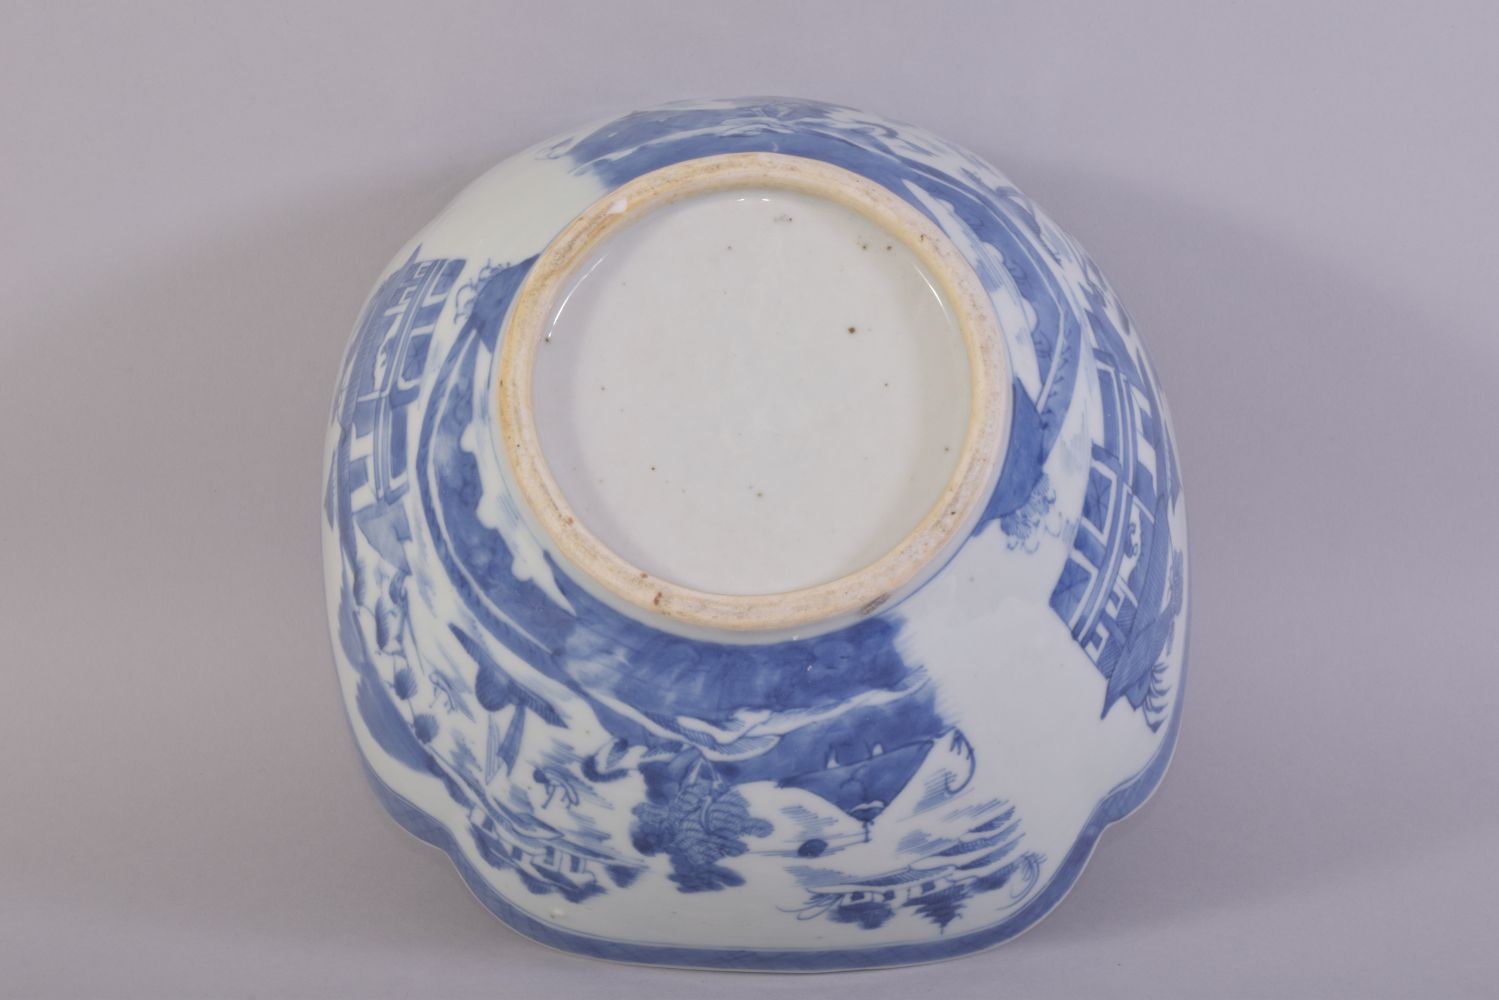 A CHINESE BLUE AND WHITE PORCELAIN BOWL, decorated with a landscape including buildings, boats and - Image 6 of 6